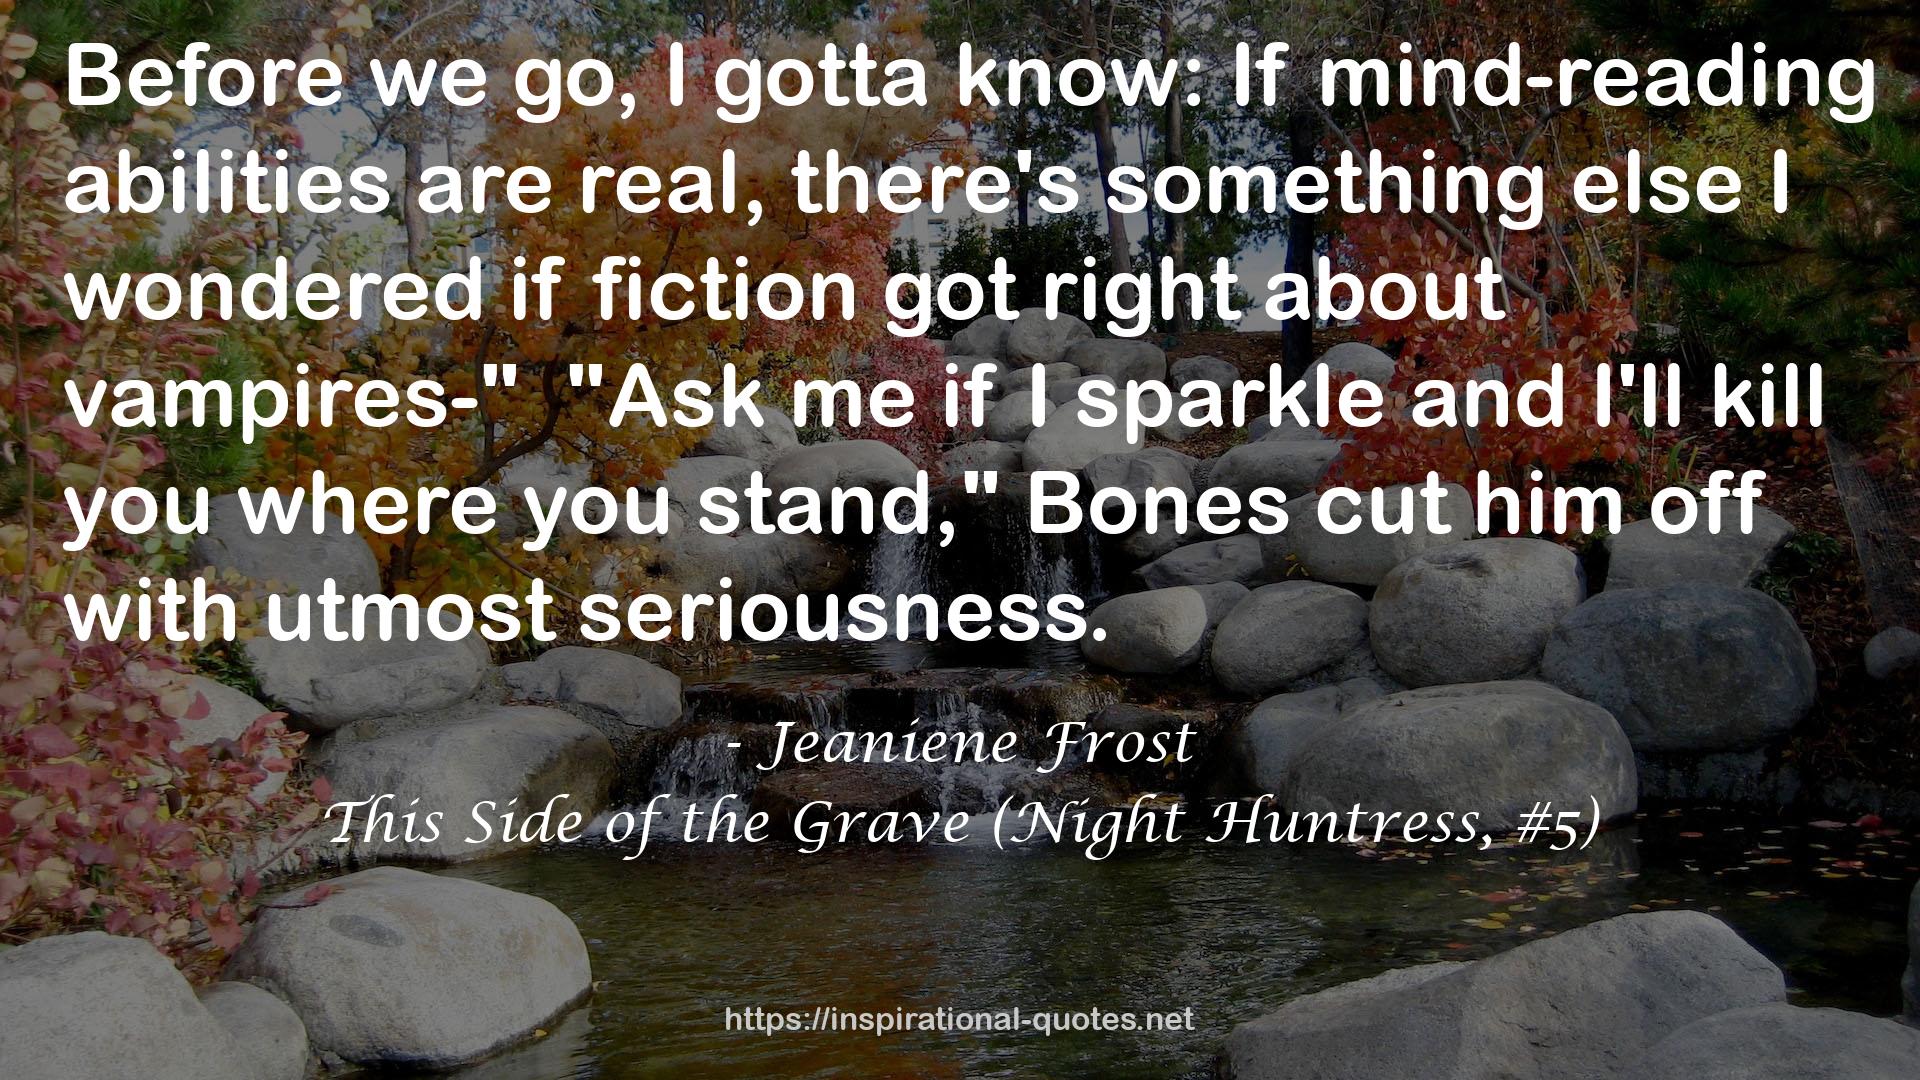 This Side of the Grave (Night Huntress, #5) QUOTES